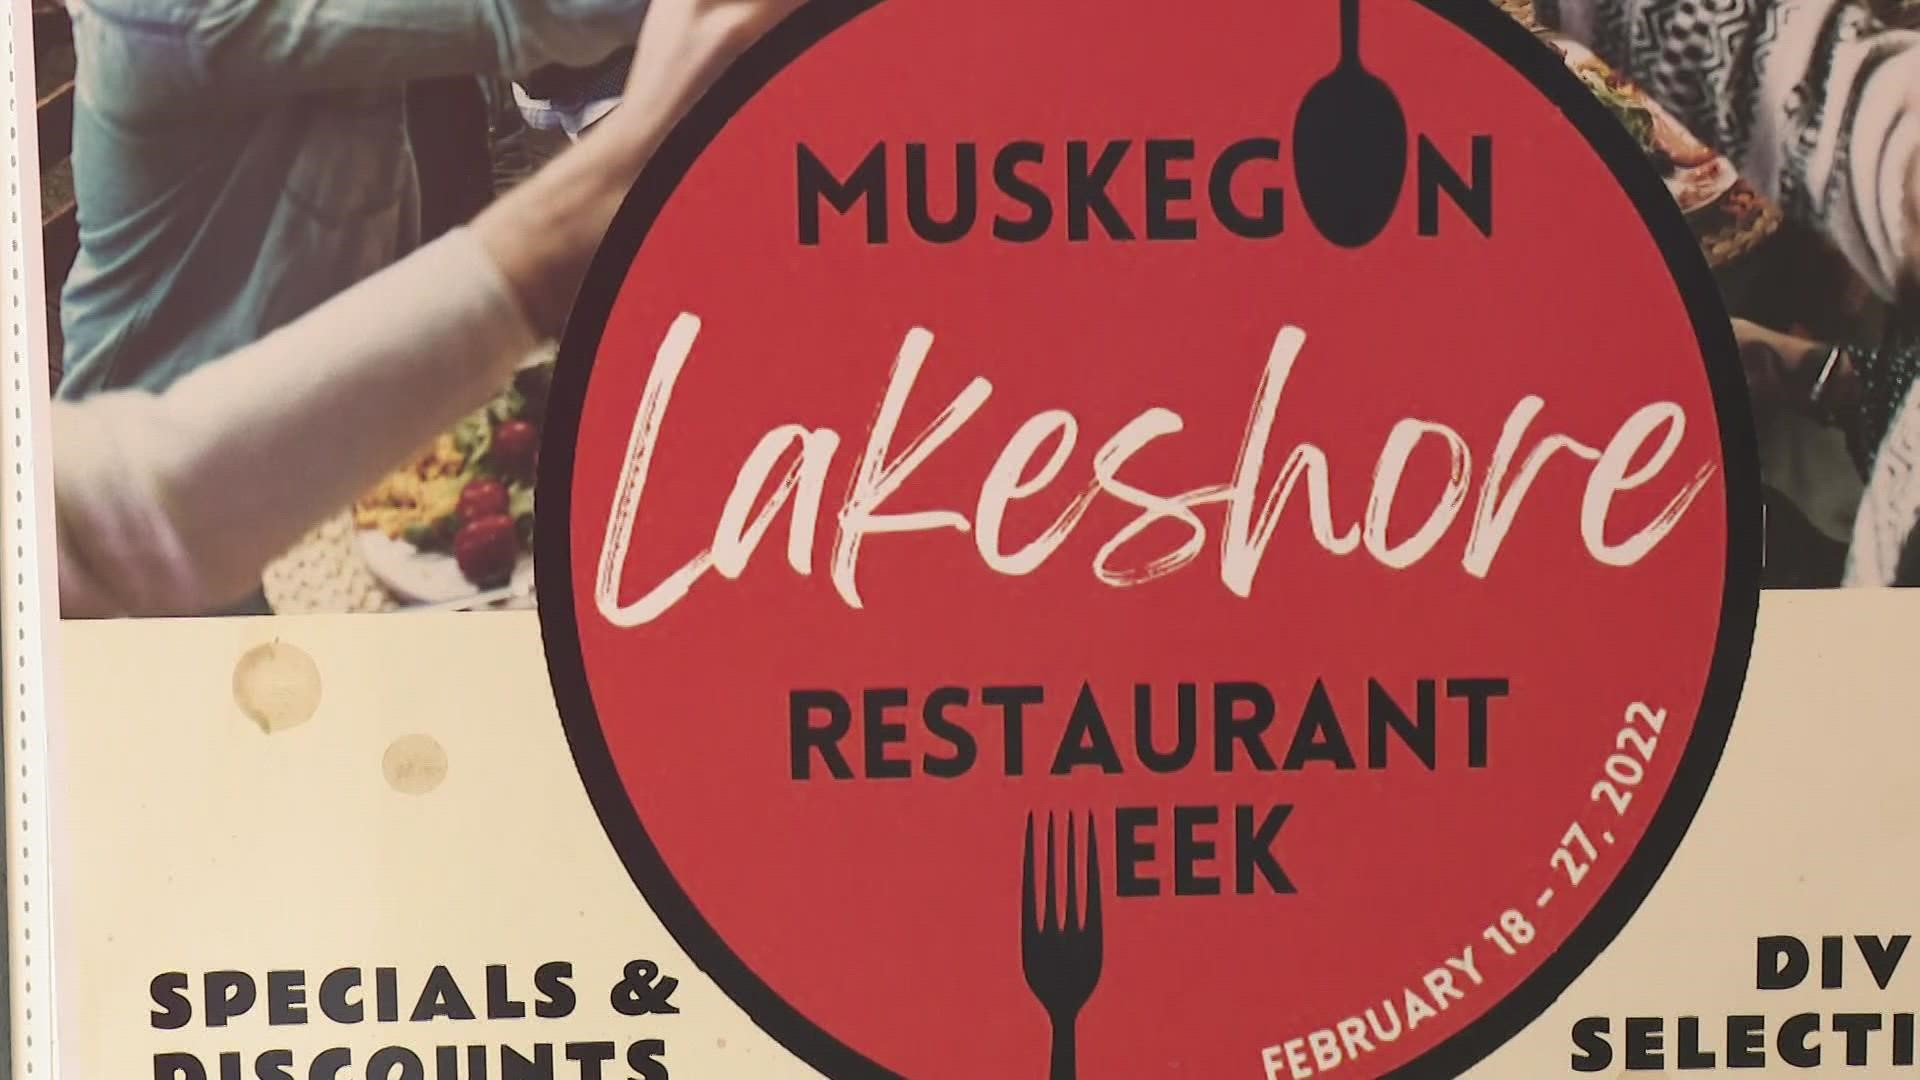 Lakeshore Restaurant Week aims to highlight local businesses and introduce customers to new restaurants.